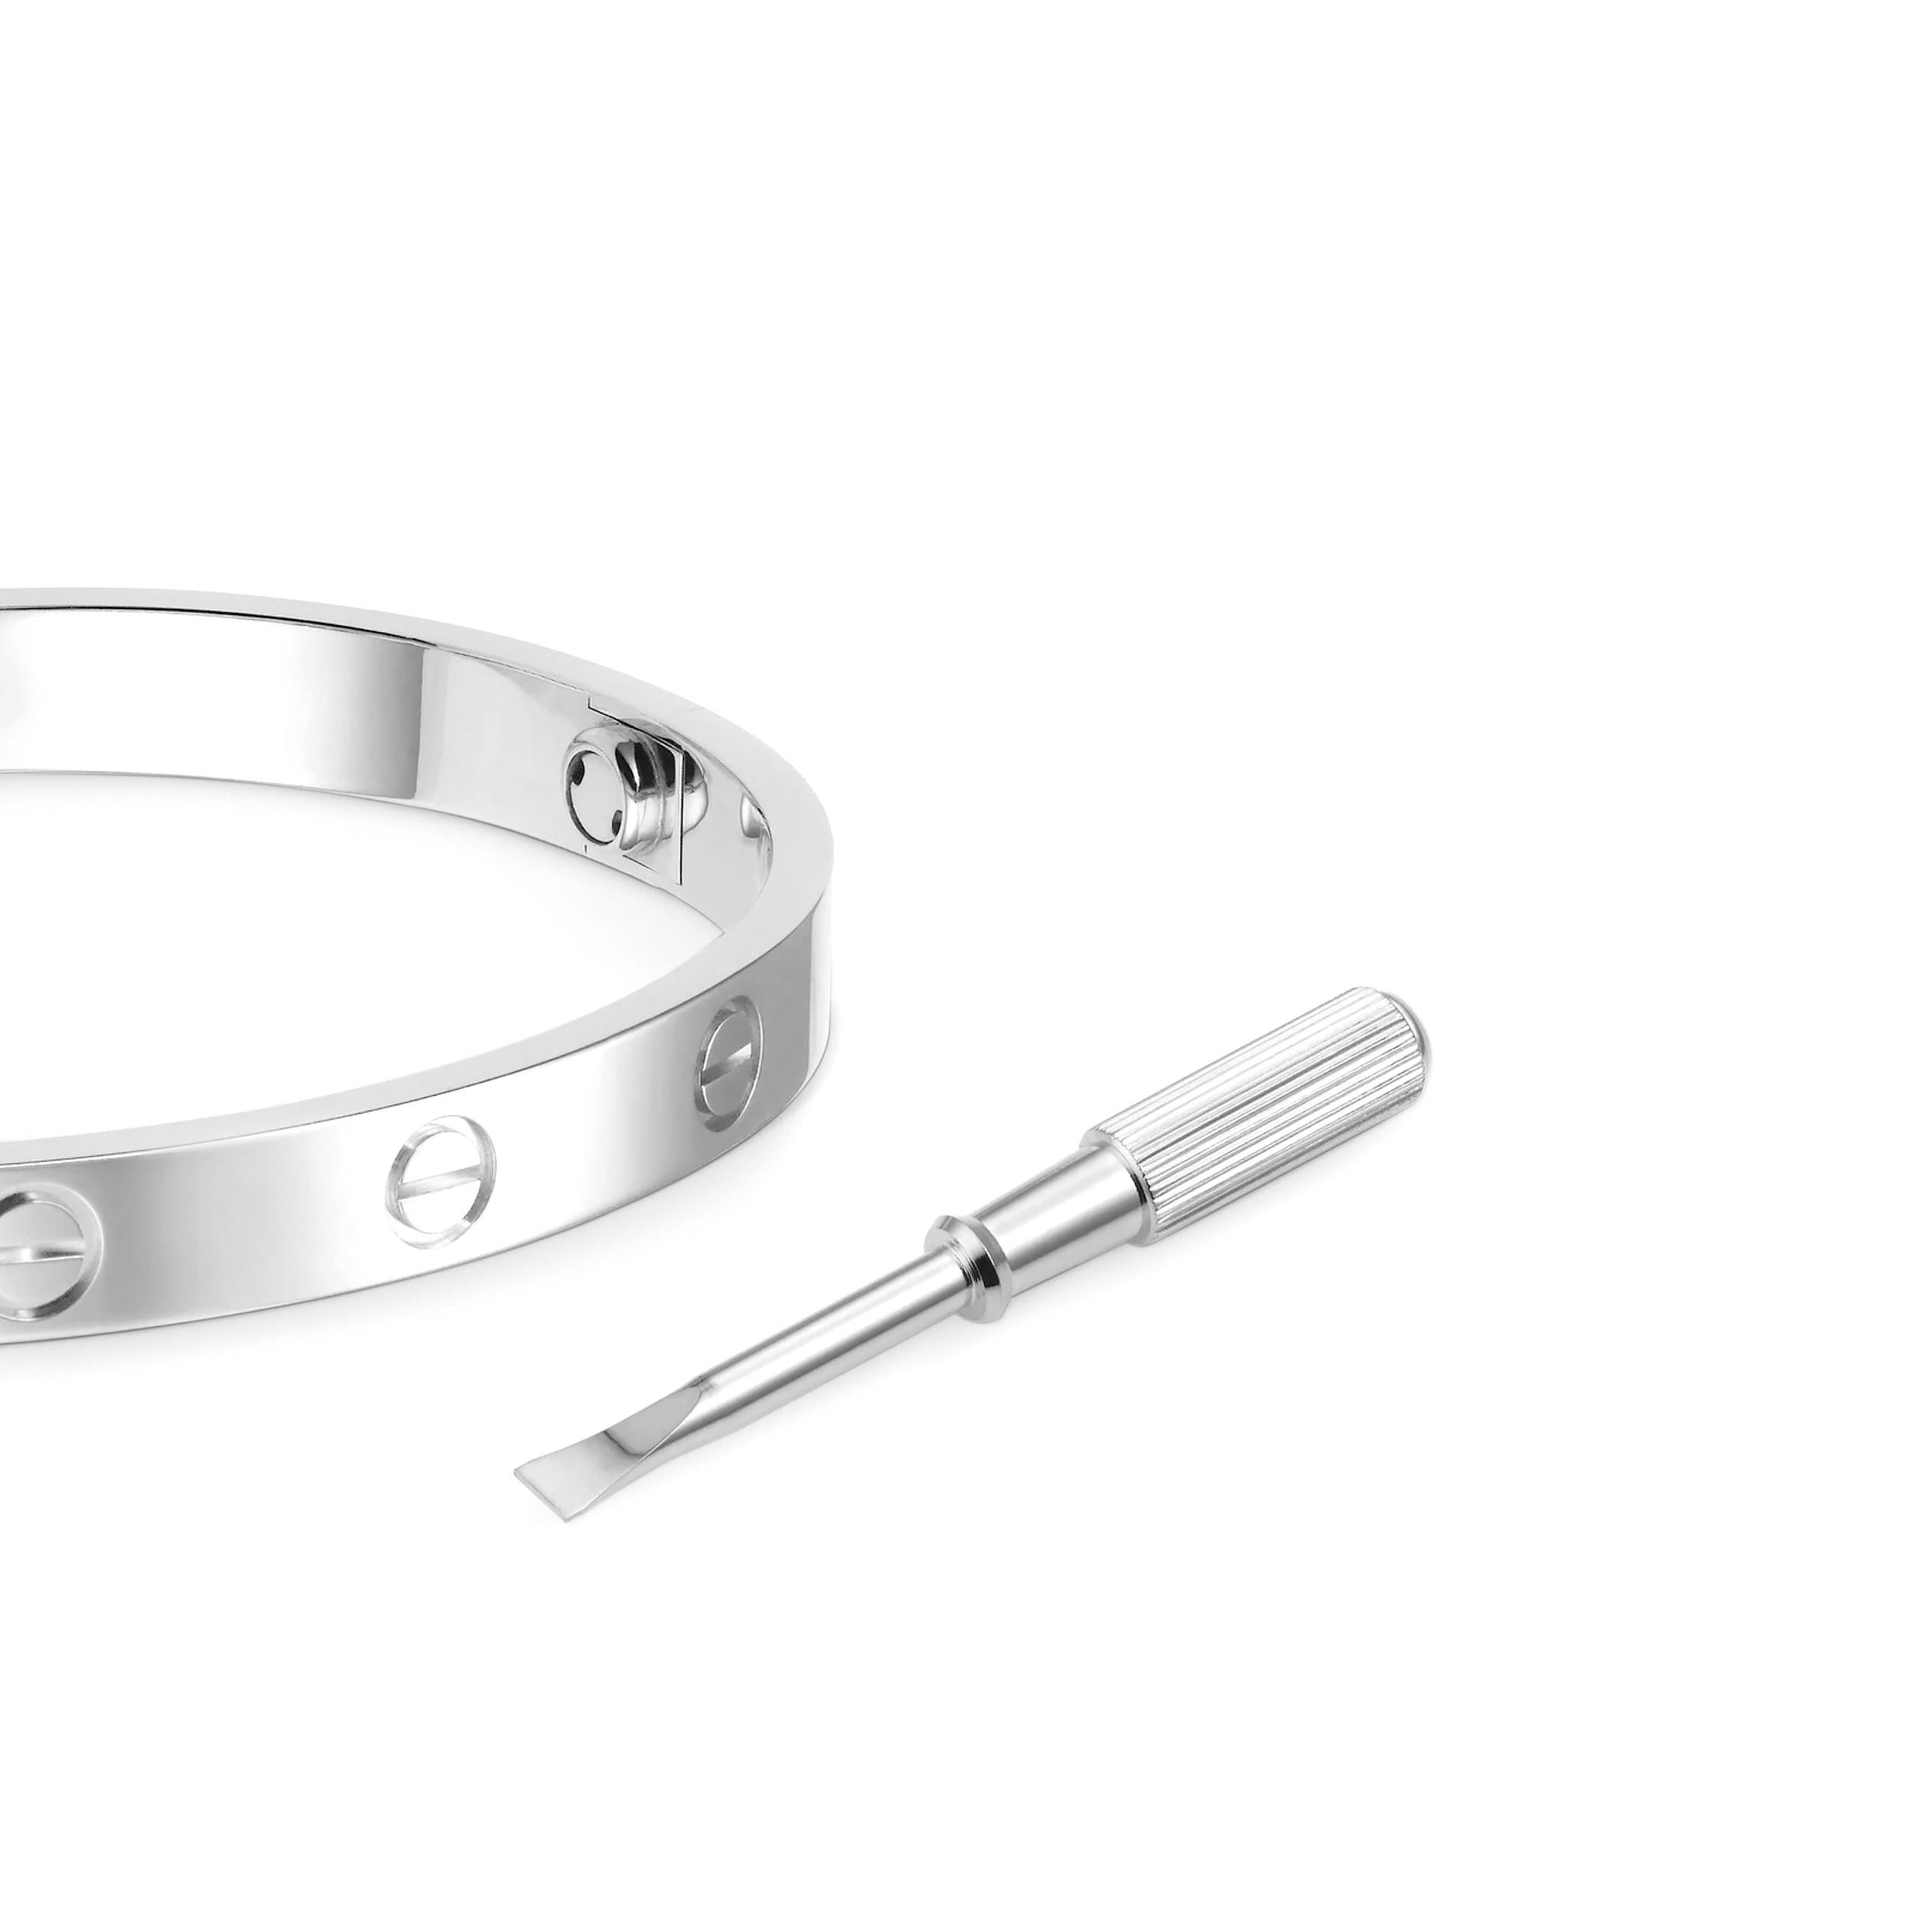 This iconic Cartier 'Love' bangle has been crafted in 18 carat white gold. The bangle is a Cartier size 17 and comes with the original Cartier screwdriver and box. Stamped Cartier 17 AOE390 Au 750.